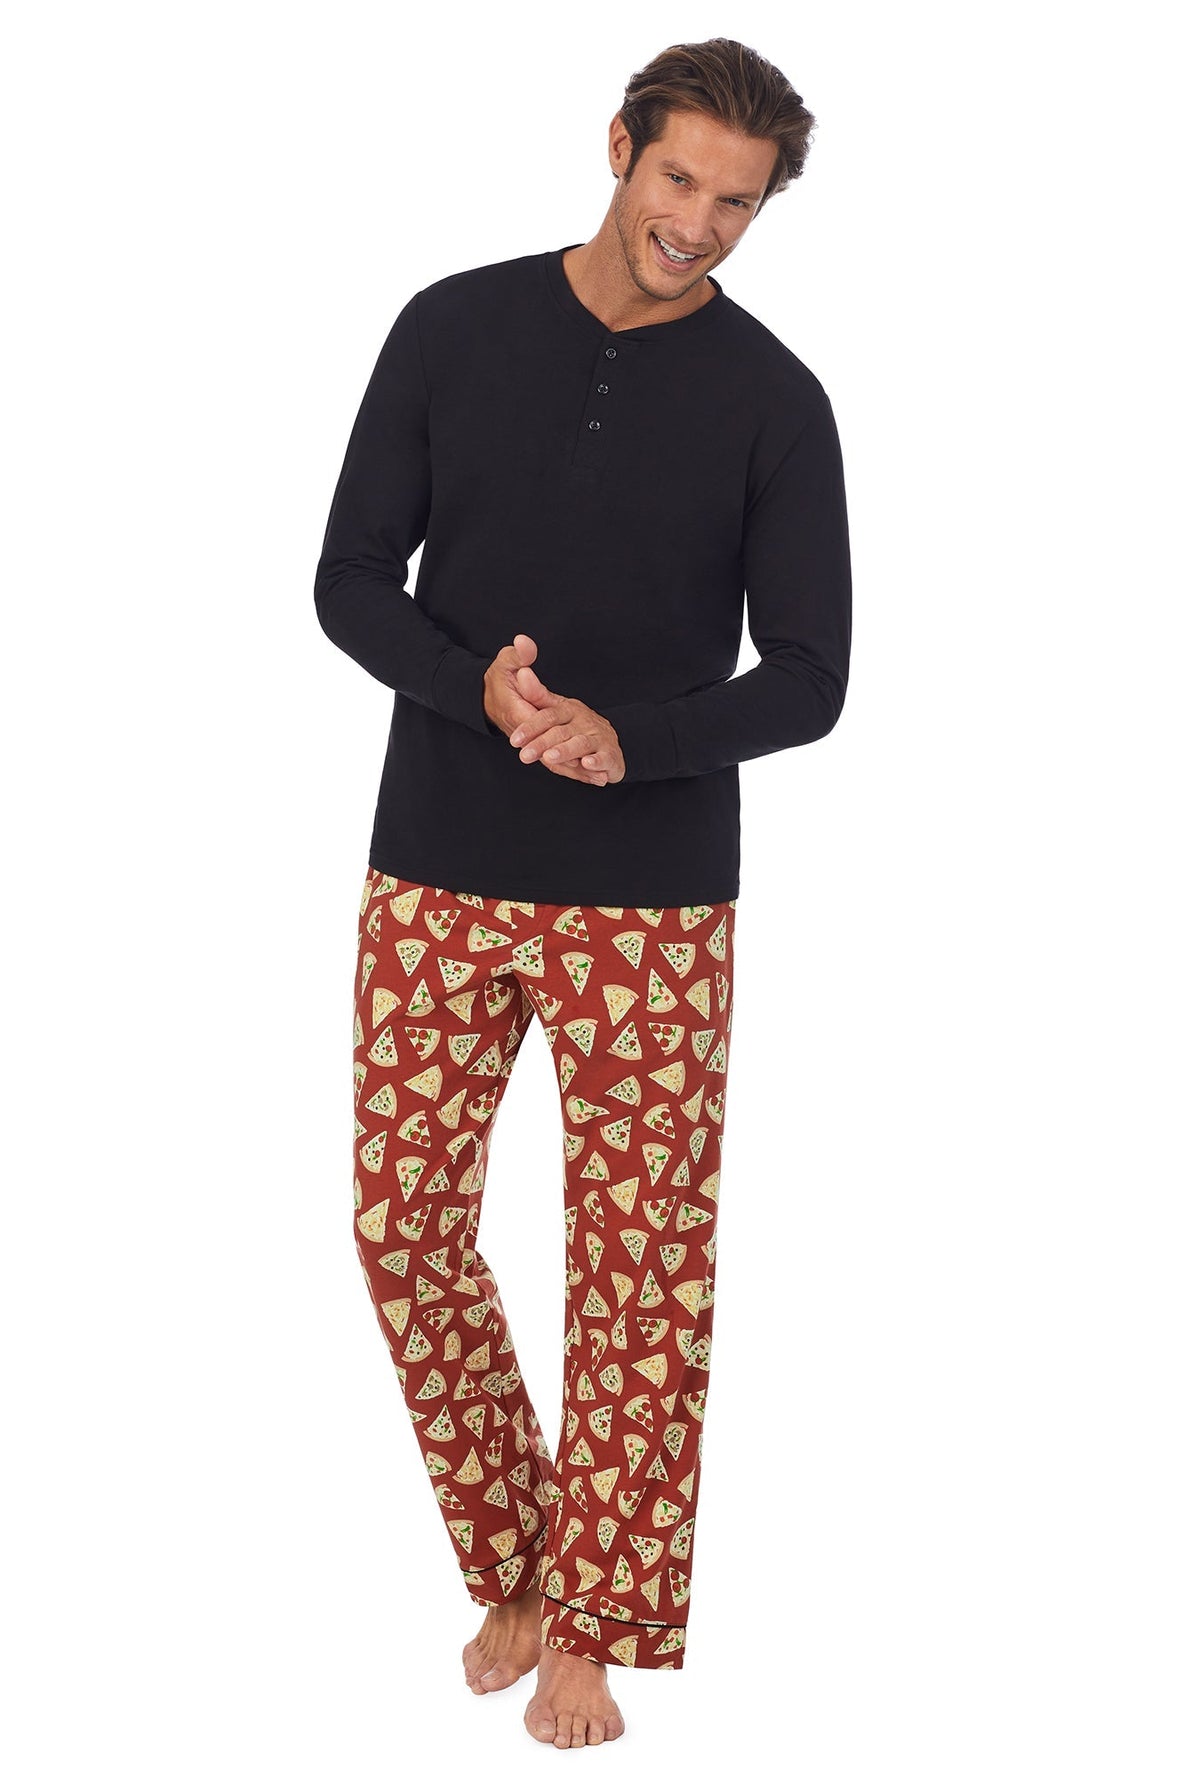 A man wearing a black long sleeve jersey and brown long bottom pj set with pizza pattern.